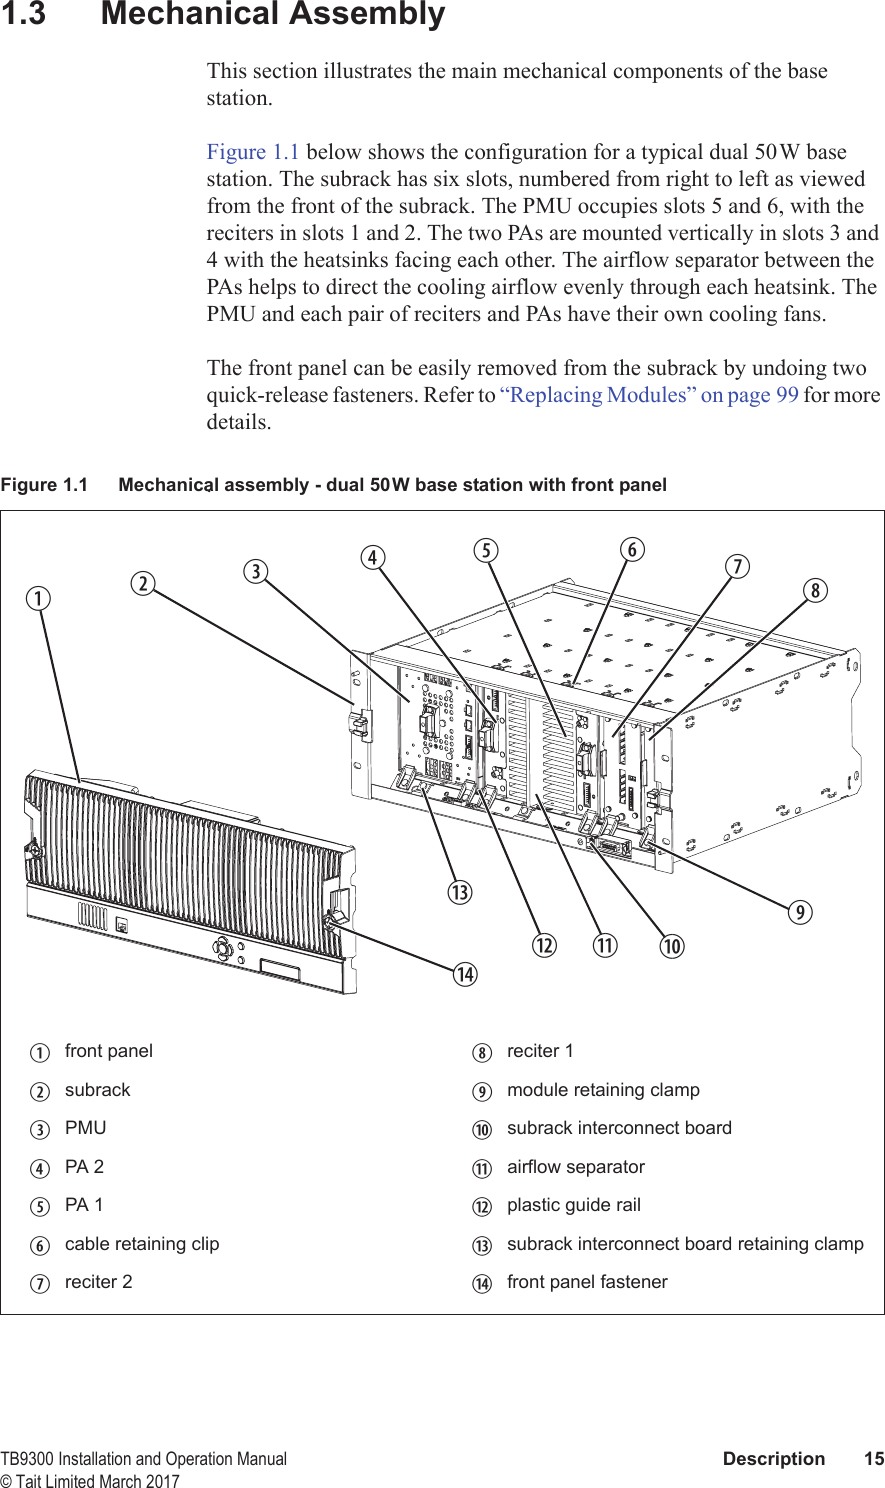  TB9300 Installation and Operation Manual Description 15© Tait Limited March 20171.3 Mechanical AssemblyThis section illustrates the main mechanical components of the base station. Figure 1.1 below shows the configuration for a typical dual 50W base station. The subrack has six slots, numbered from right to left as viewed from the front of the subrack. The PMU occupies slots 5 and 6, with the reciters in slots 1 and 2. The two PAs are mounted vertically in slots 3 and 4 with the heatsinks facing each other. The airflow separator between the PAs helps to direct the cooling airflow evenly through each heatsink. The PMU and each pair of reciters and PAs have their own cooling fans.The front panel can be easily removed from the subrack by undoing two quick-release fasteners. Refer to “Replacing Modules” on page 99 for more details..Figure 1.1 Mechanical assembly - dual 50W base station with front panelbfront panel ireciter 1csubrack jmodule retaining clampdPMU 1) subrack interconnect boardePA 2 1! airflow separatorfPA 1 1@ plastic guide railgcable retaining clip 1# subrack interconnect board retaining clamphreciter 2 1$ front panel fastenerbcdefghij1)1@1#1$1!